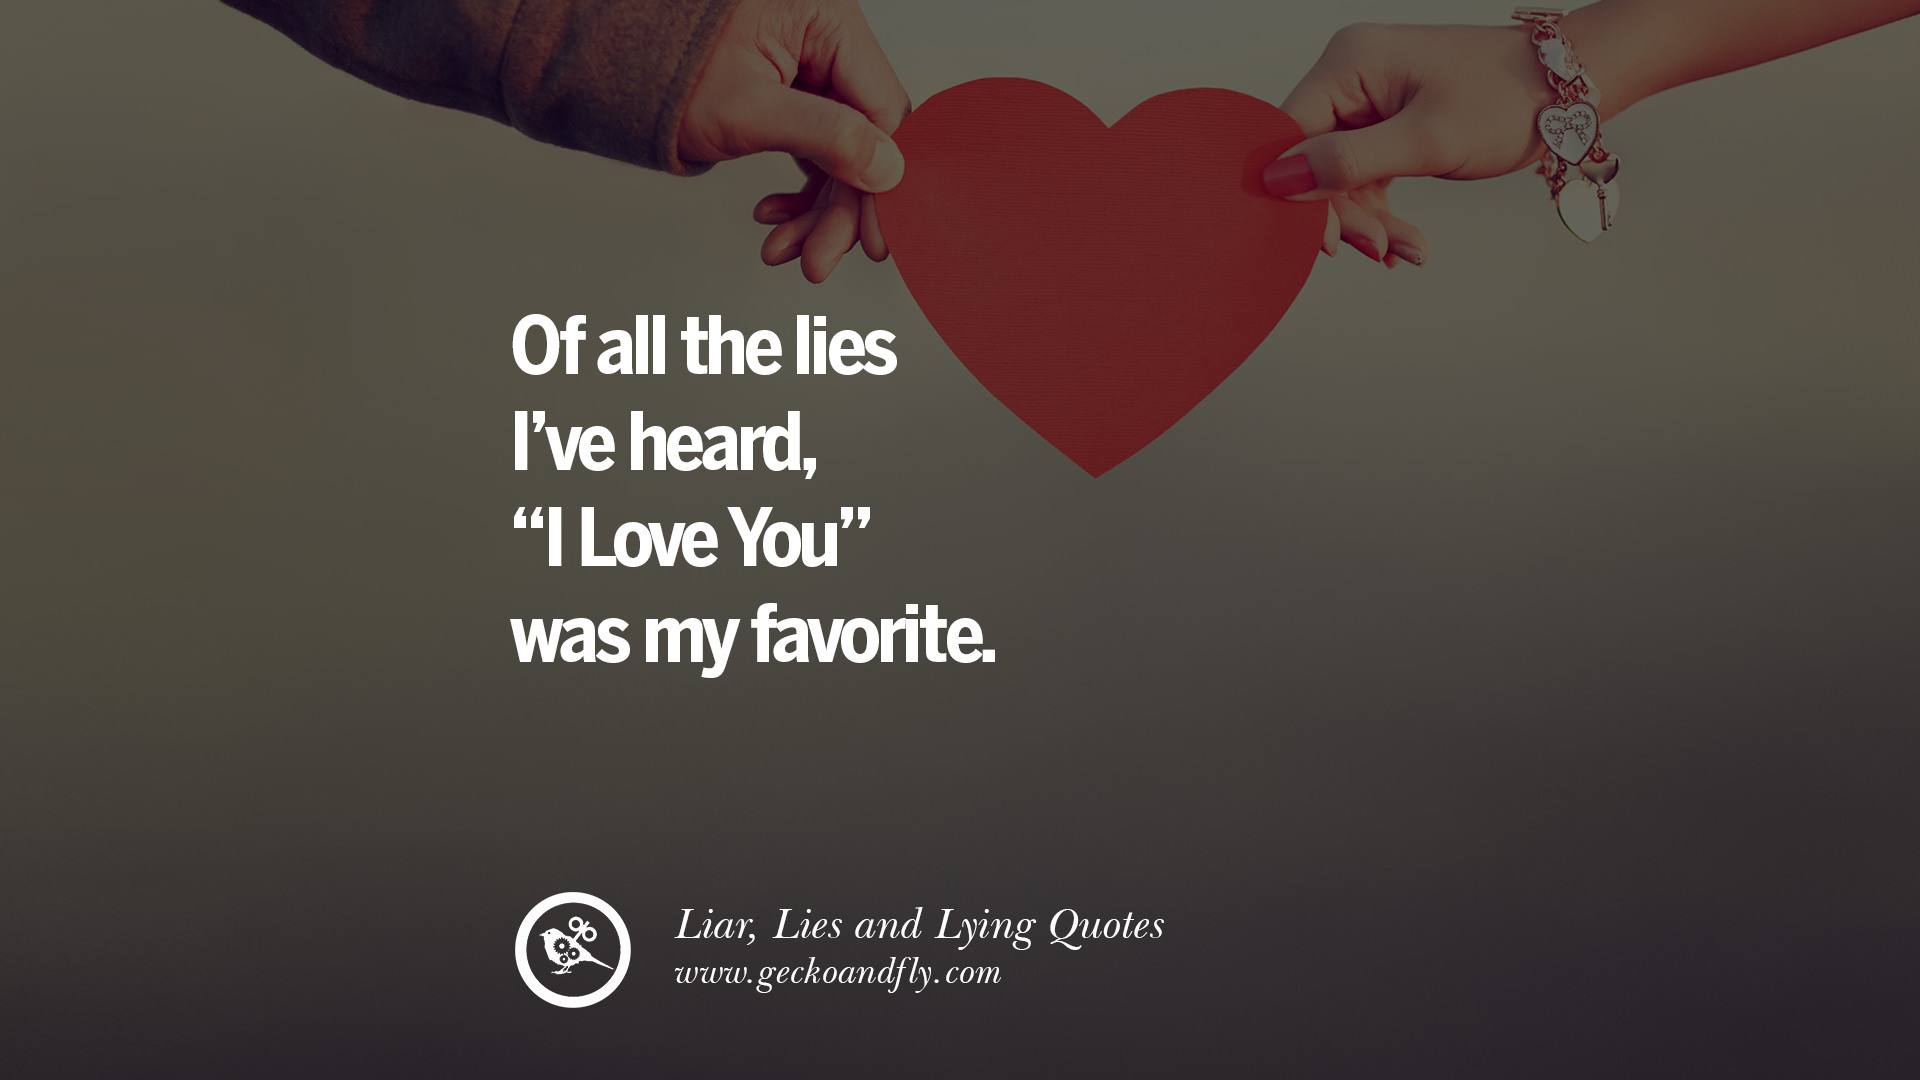 5 Liars Quotes About Love